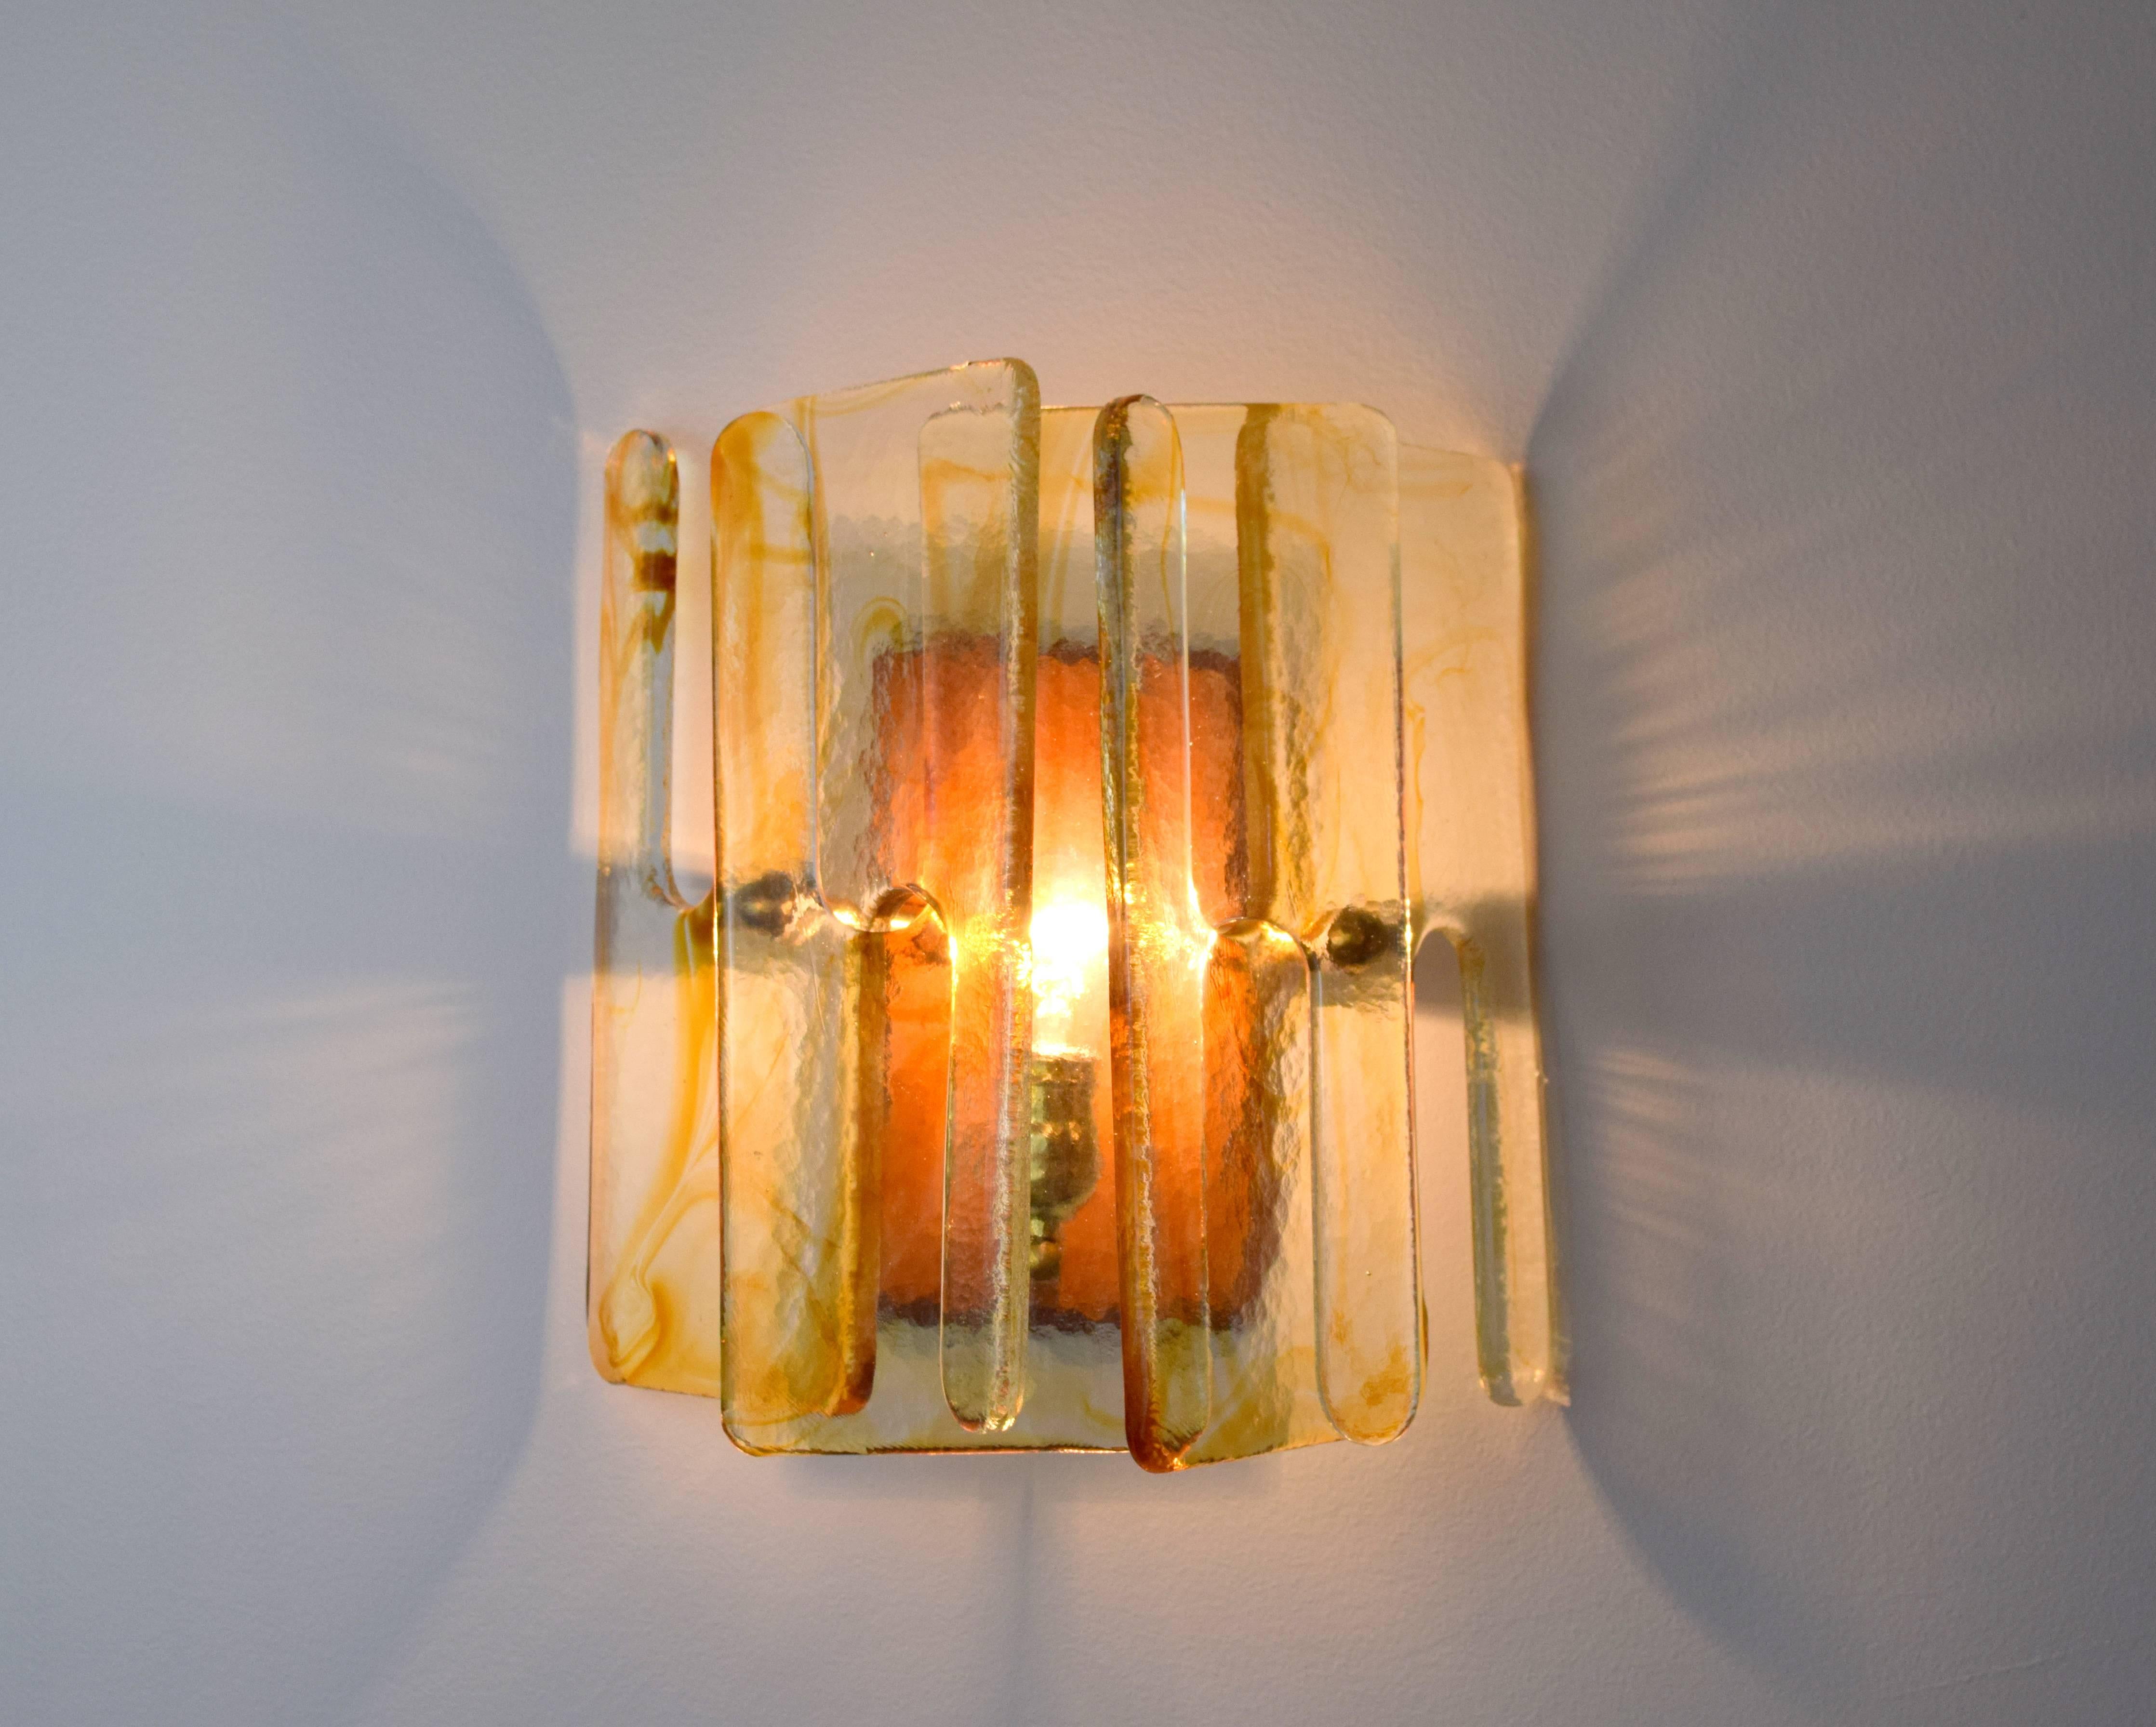 Beautiful clear and amber Murano glass sconces by Mazzega. Constructed of three interlocking glass panels with brass fittings mounted on wood backplate with single brass light socket. Each glass panel in an N shape being 7.75